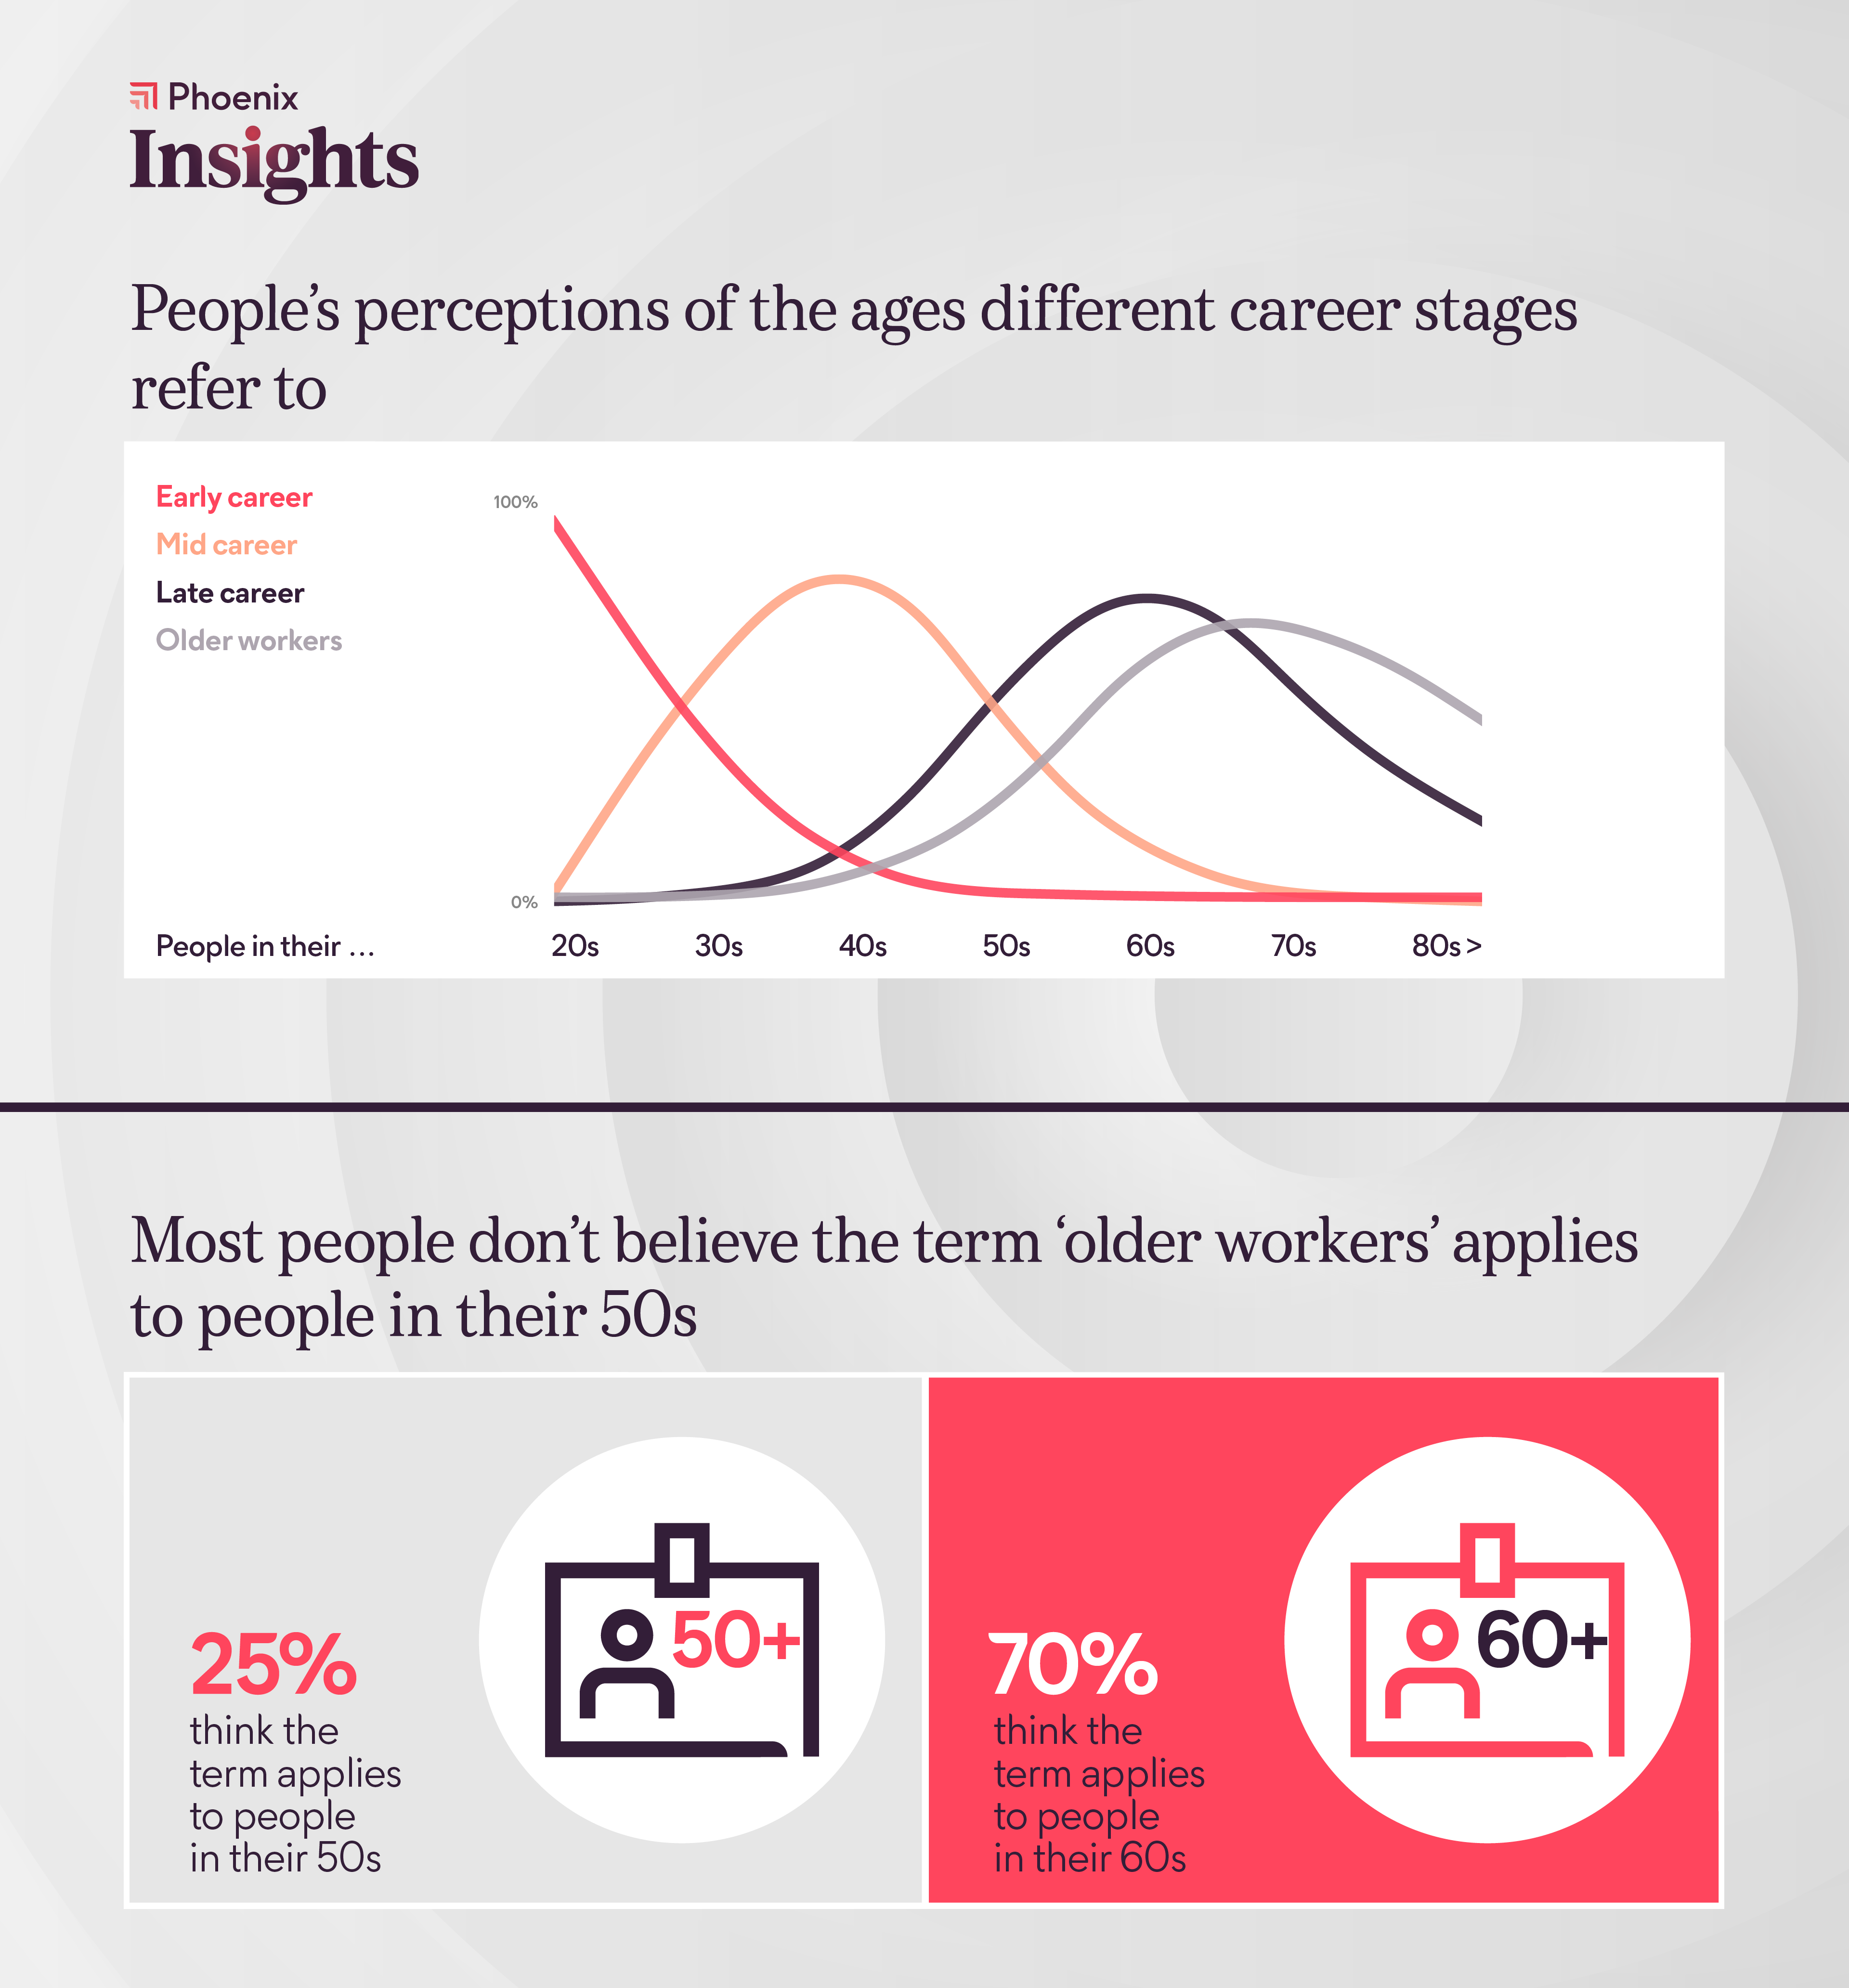 People's perceptions of the ages different career stages refer to; Early Career can refer to people aged between 20-40, Mid Career can range from 25-50, Late career can range from 45-70, and older workers can refer to people between 45-80+.   Most people don't believe the term 'older workers' applies to people in their 50s. Only 25% of people think the term applies to people in their 50s, while 70% think the term applies to people in their 60s. 